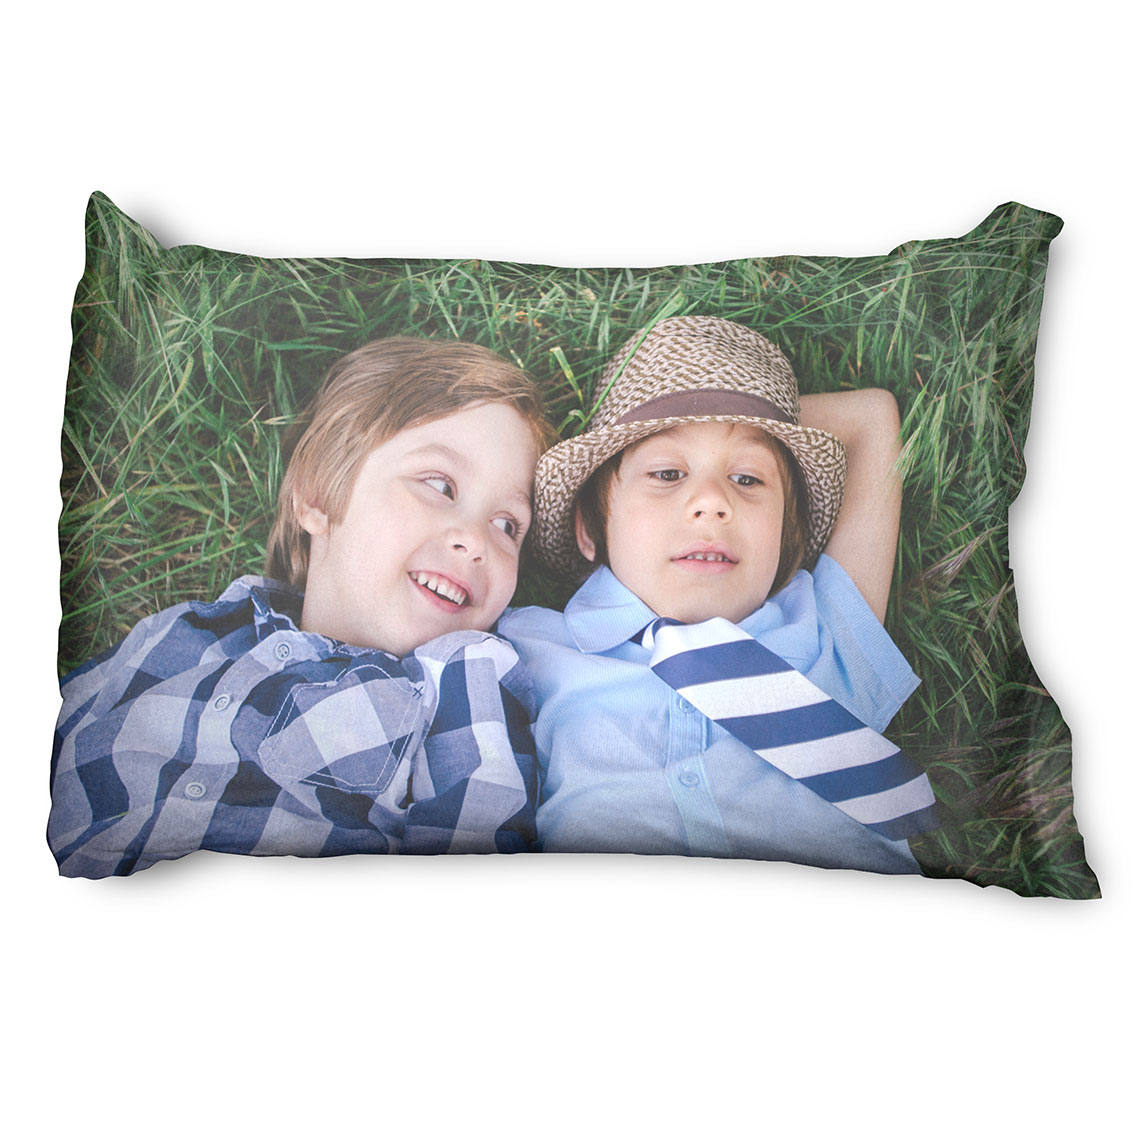 Cowboy Kids Pillow Personalized Pillow Boys Decor Kids Gifts Personalized Gifts Toddler Bedding